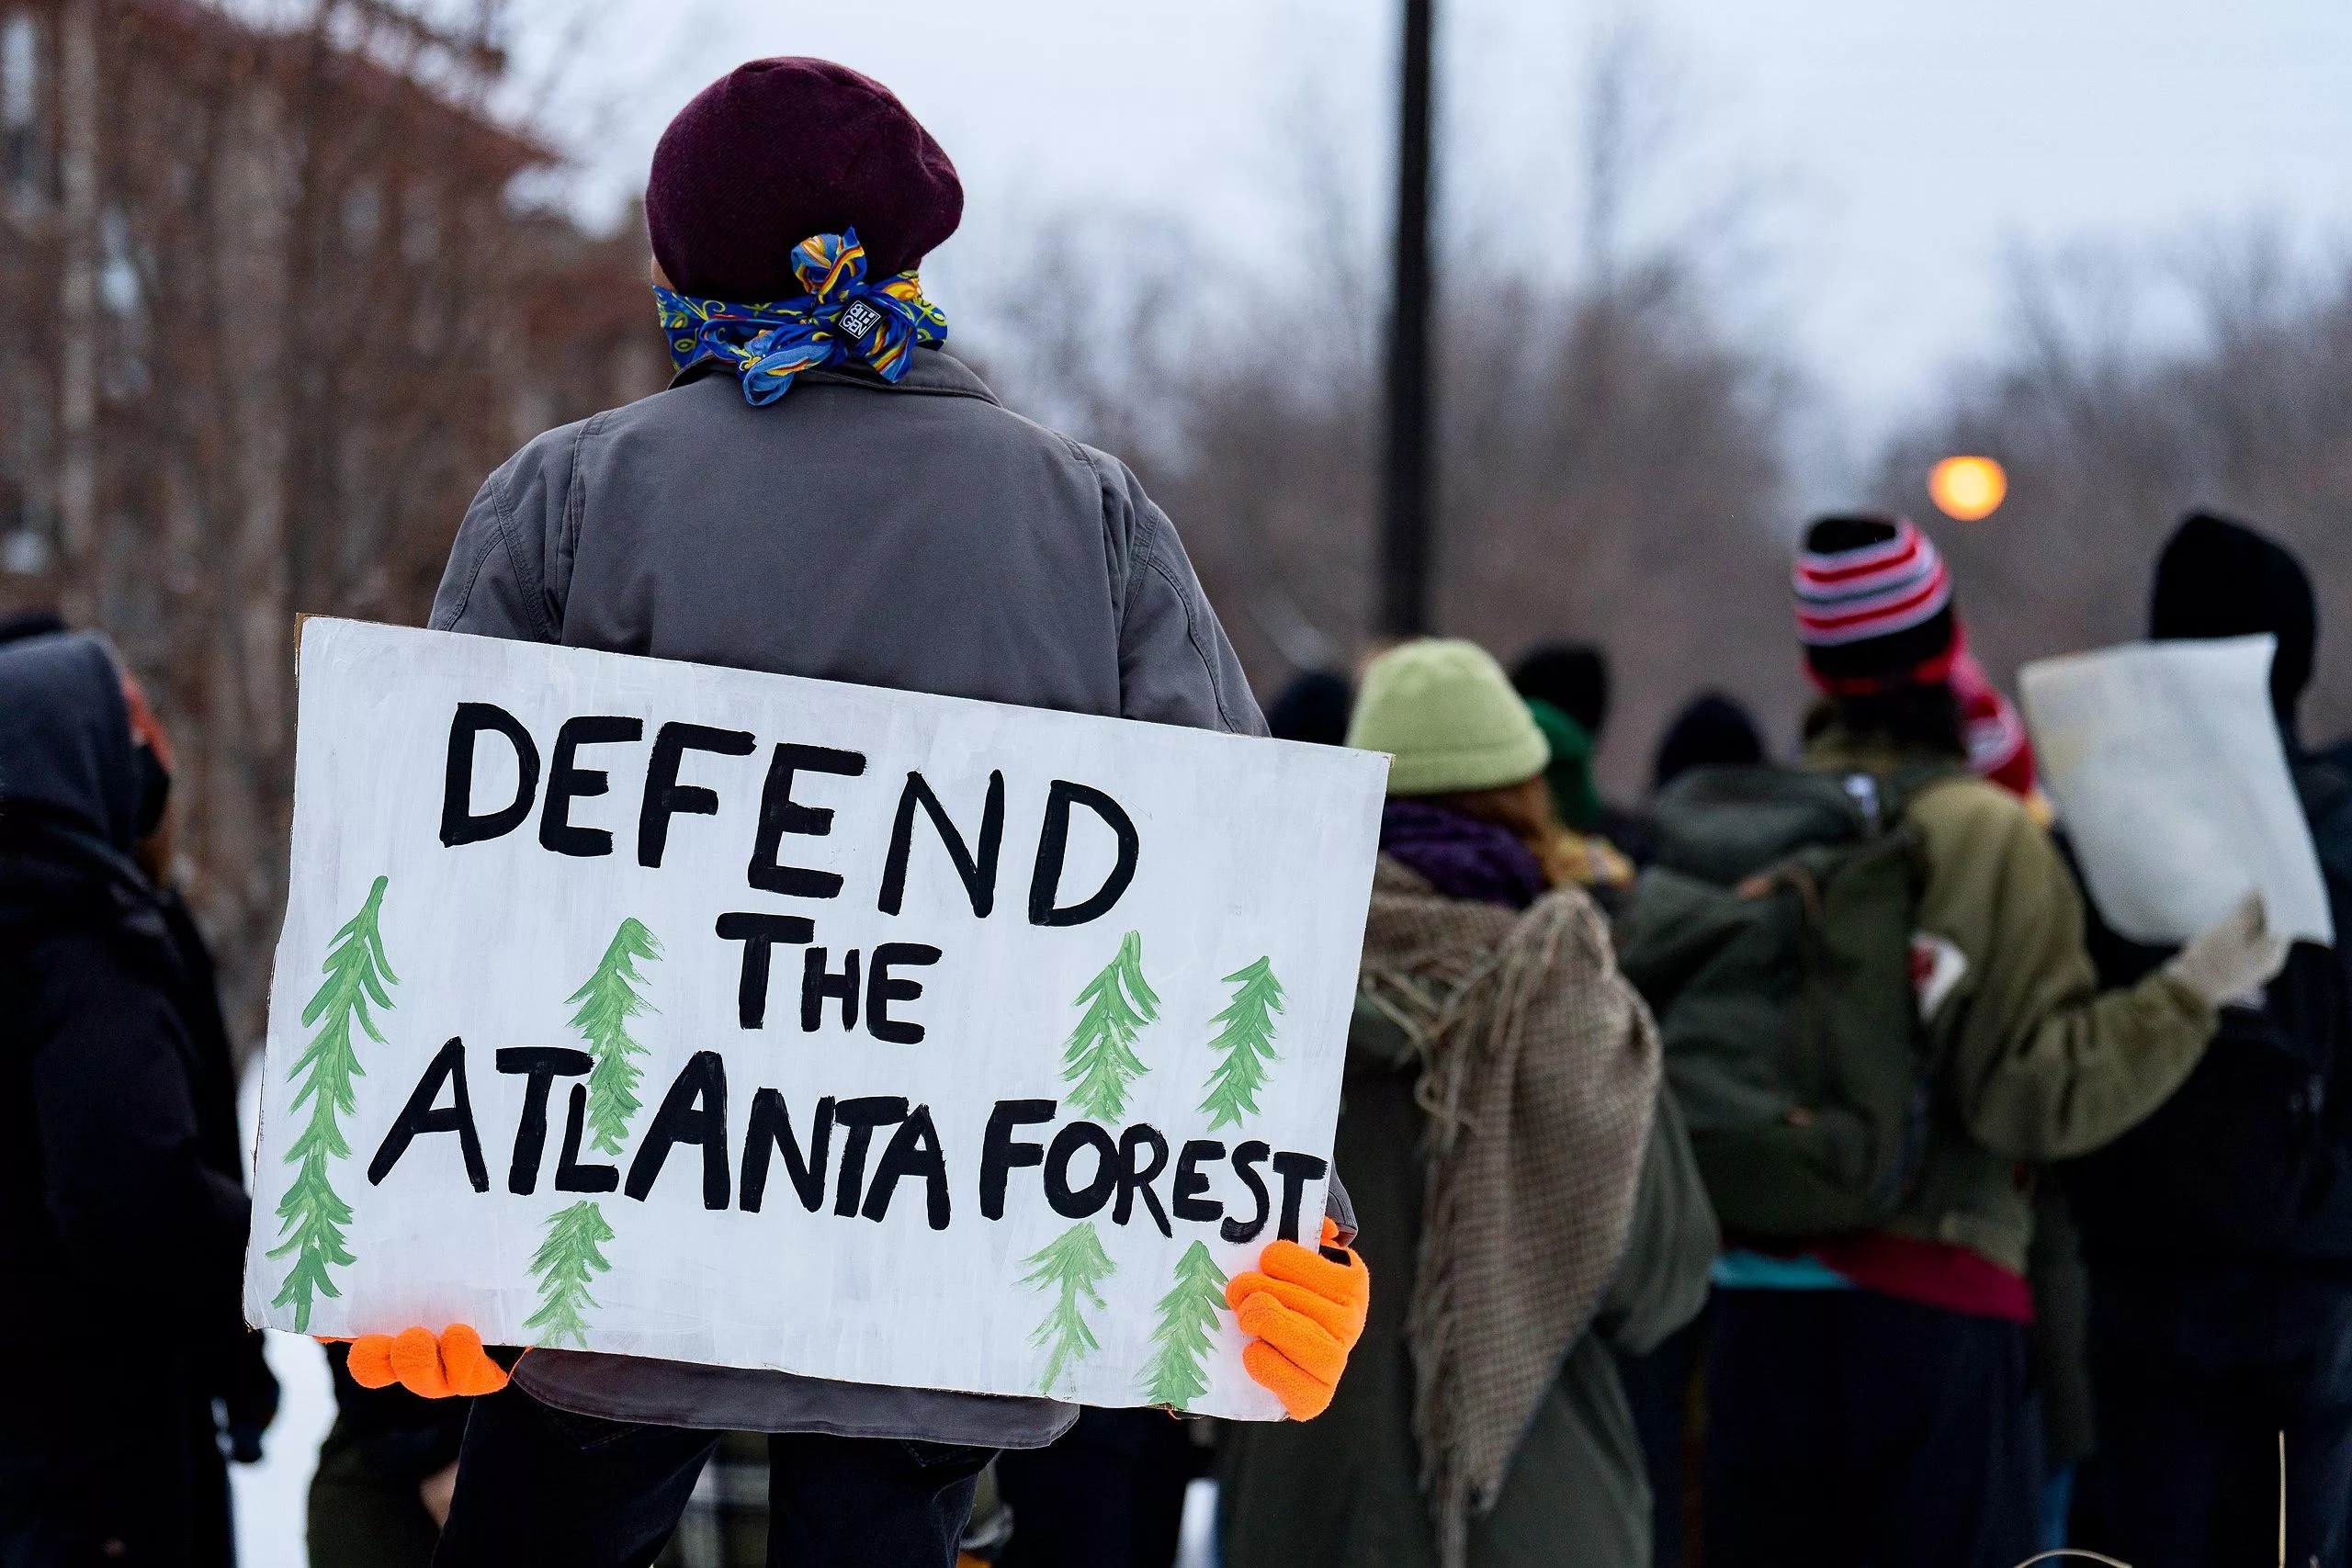 A fully masked, anonymous person in cold weather holds a sign that says "defend the Atlanta forest" in an anti Cop City protest.